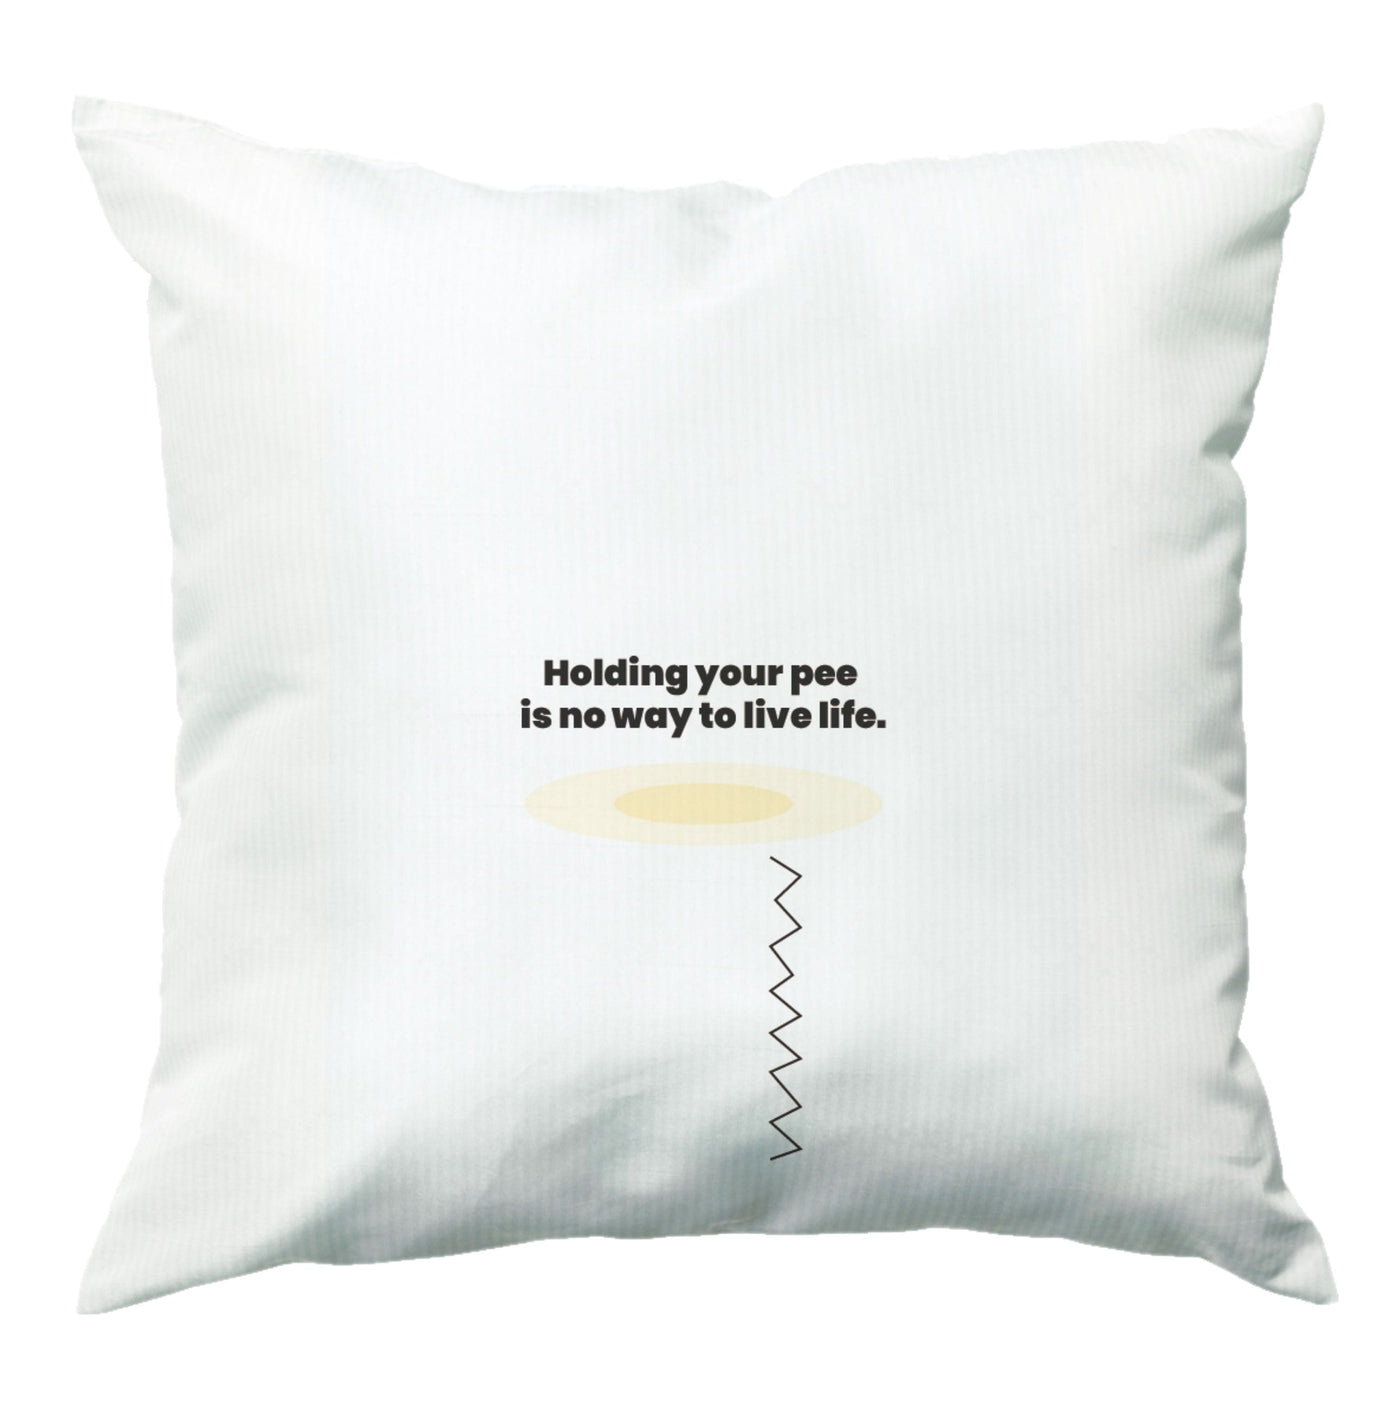 Holding your pee is no way to live life - Kendall Jenner Cushion